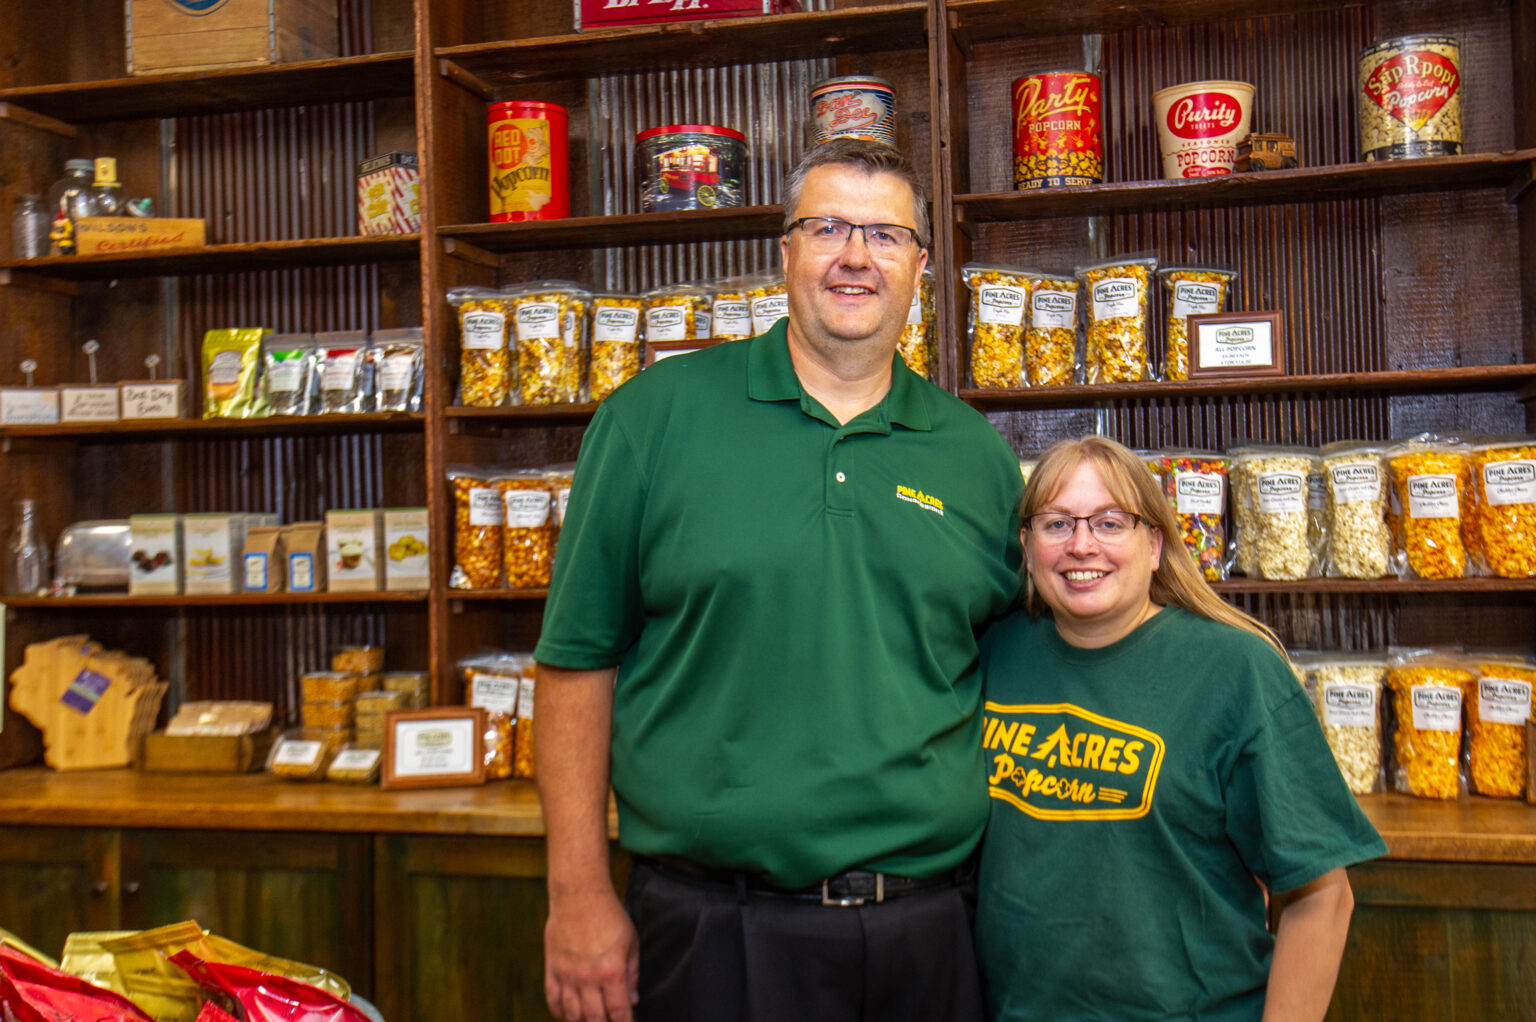 Pine Acres popcorn grand opening; picture of owners Ed and Christine Grochowski